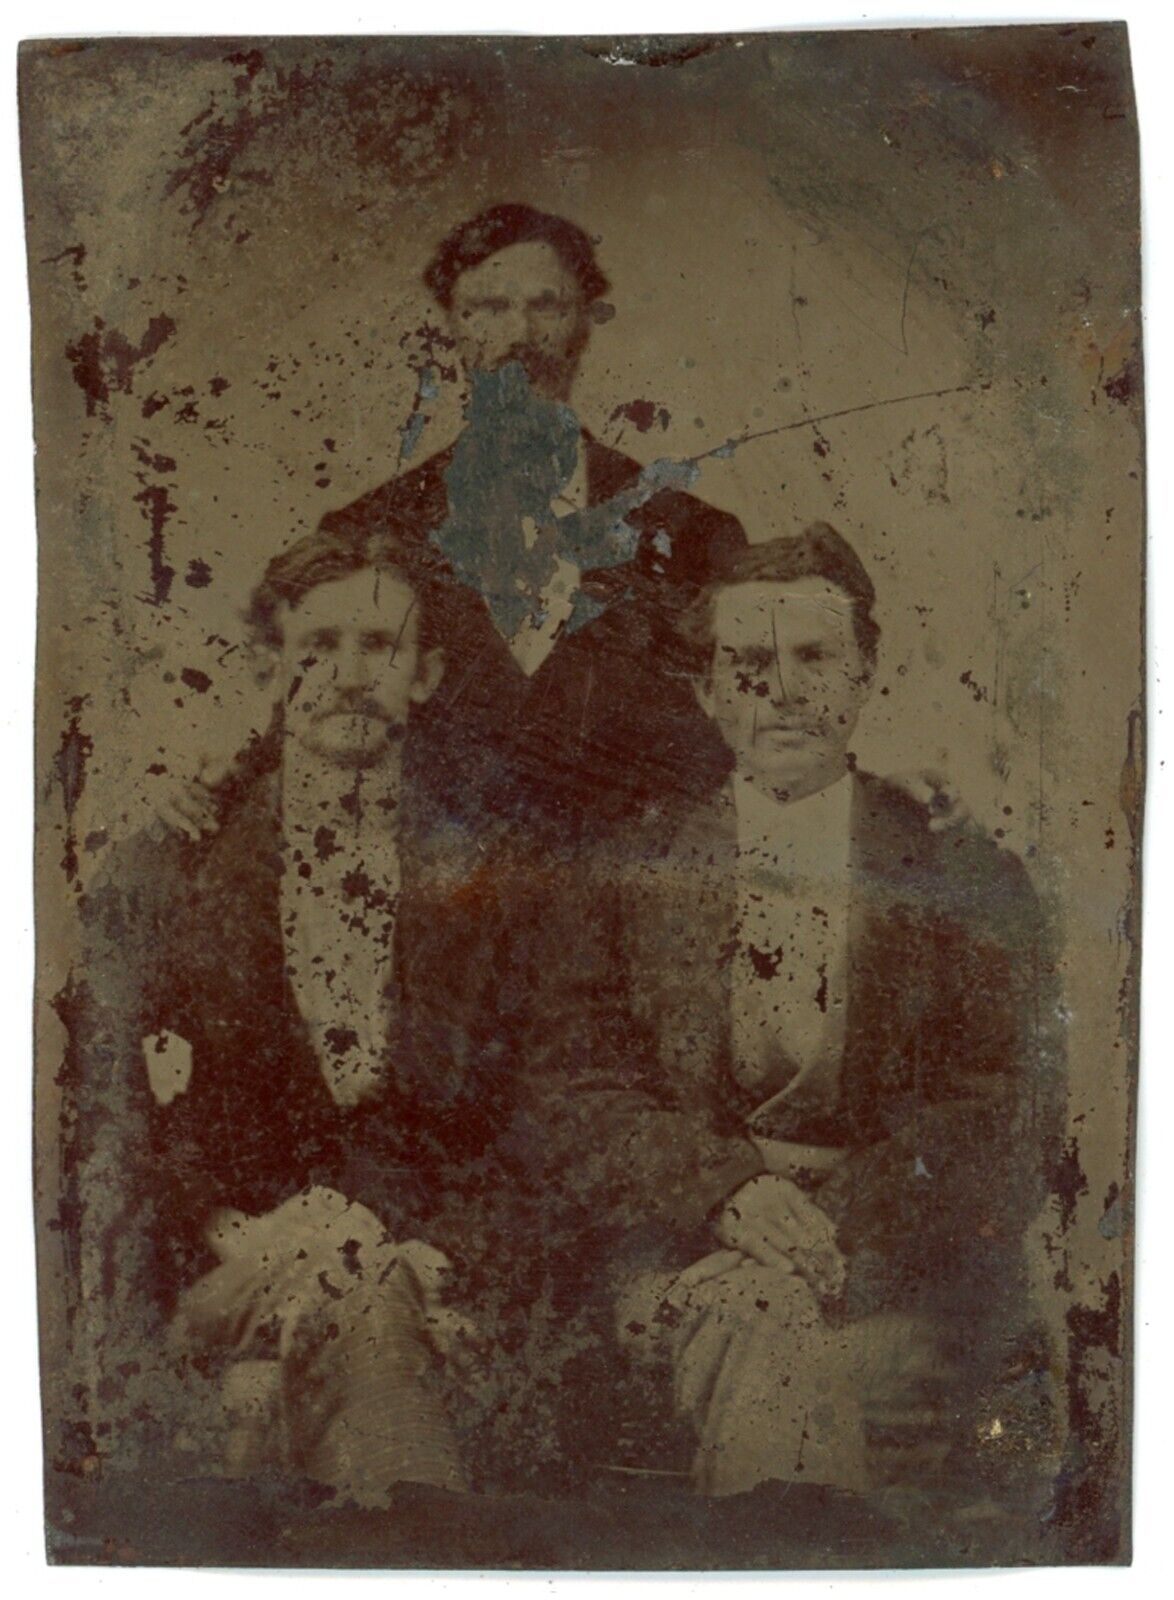 c1860'S 1/6 Plate TINTYPE Three Handsome Dapper Men in Suits Posing Together